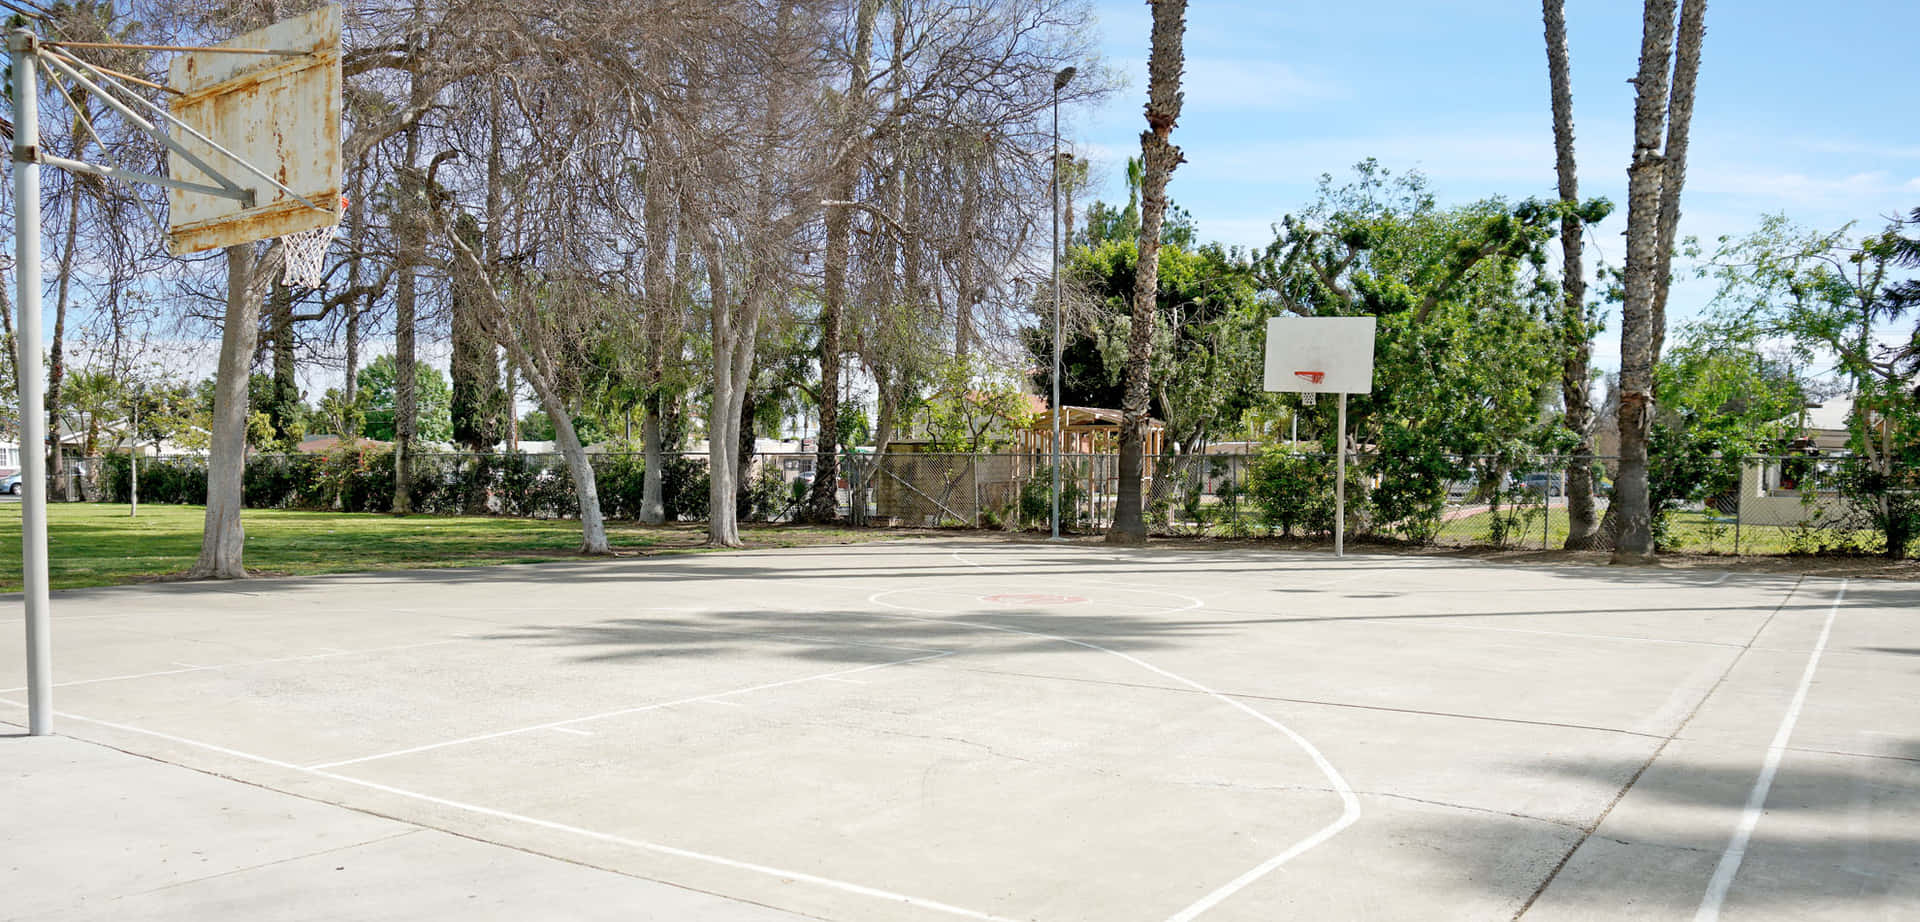 Empty Basketball Court Pictures